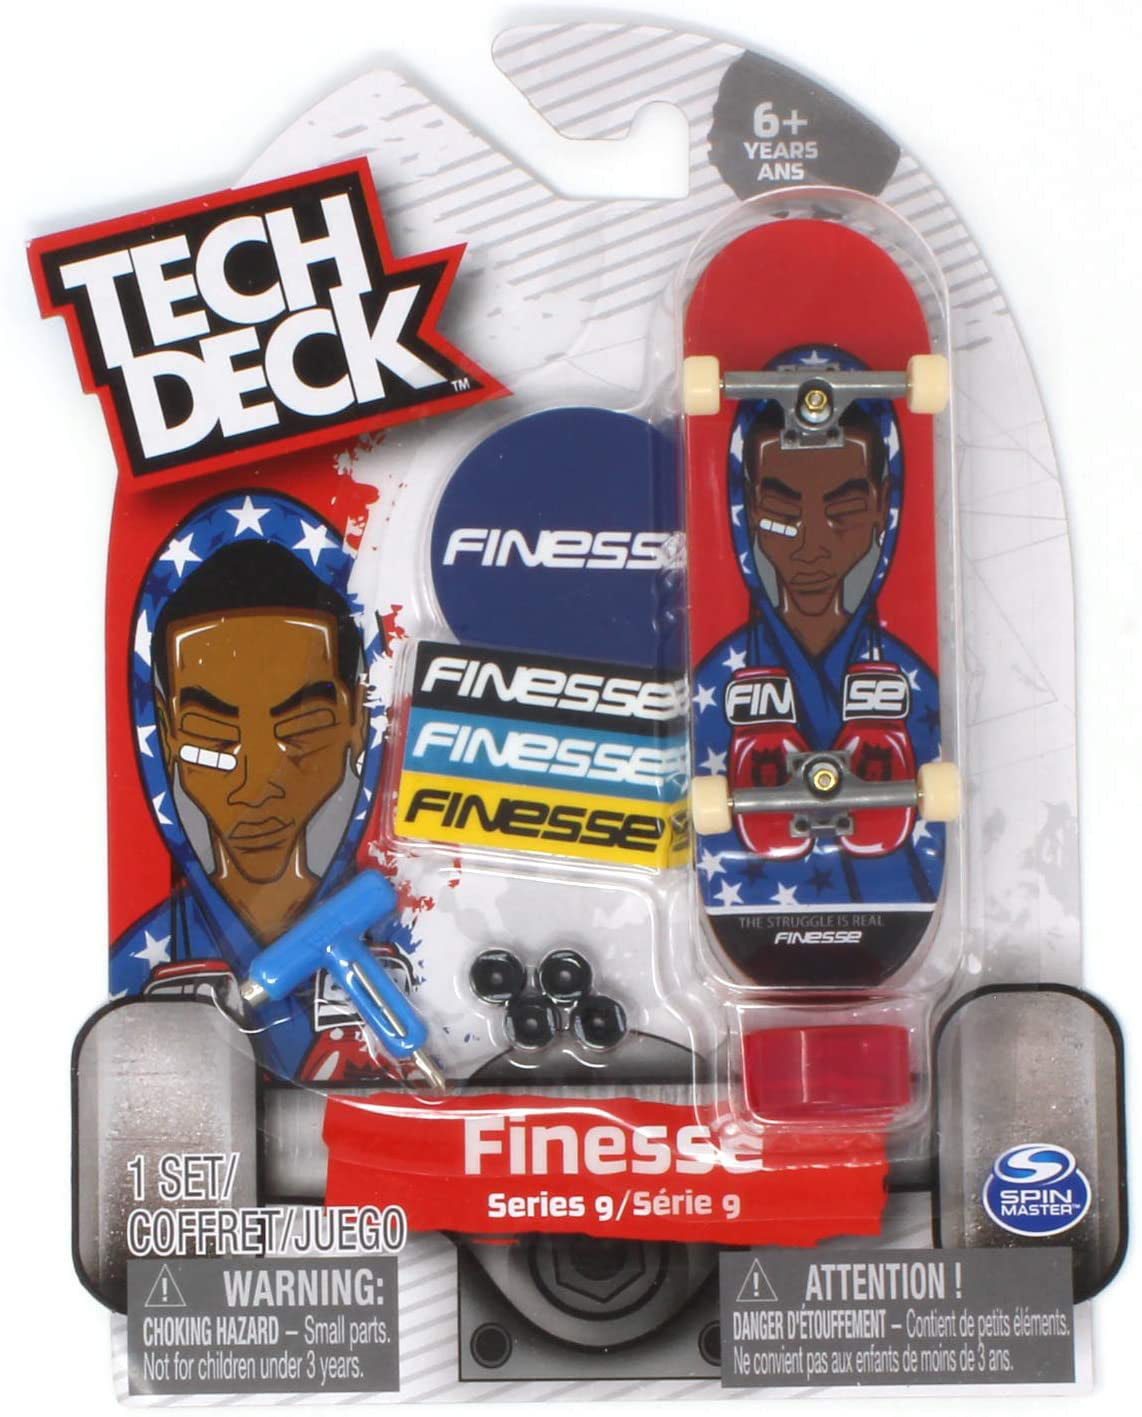 Details about   TECH DECK Series 11 Finesse Skateboards Steve James Always Keep The Dream Alive 